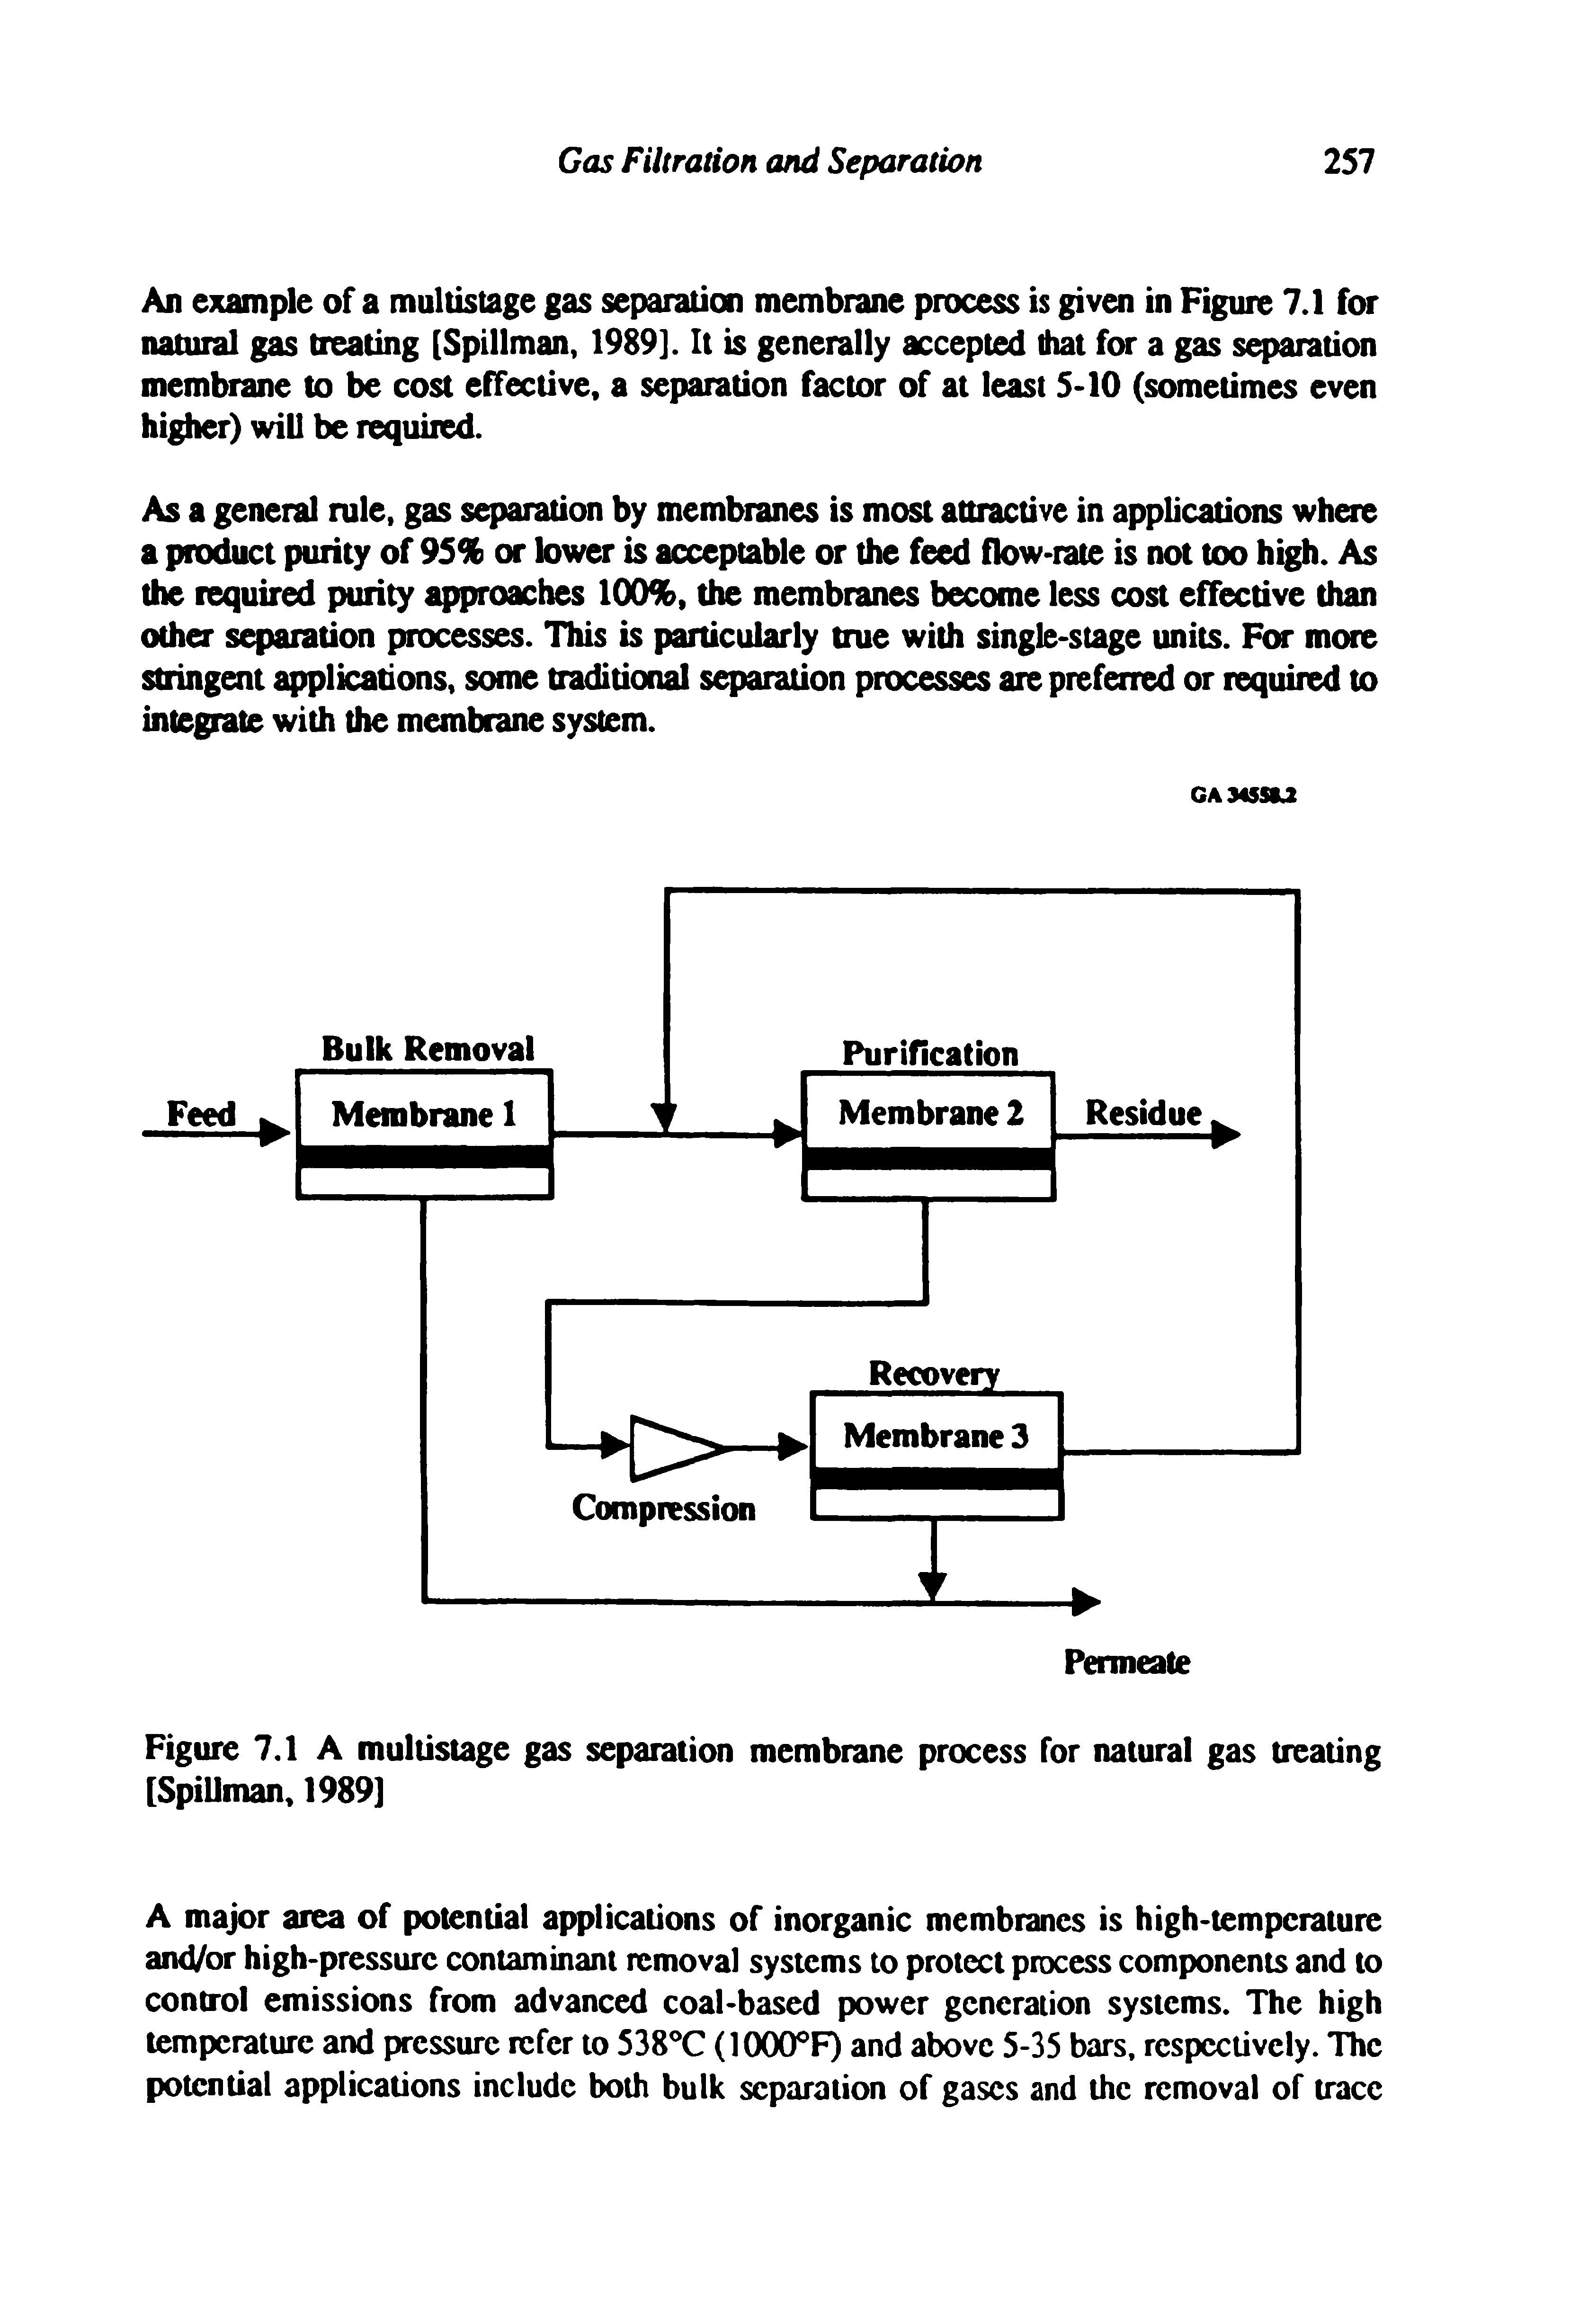 Figure 7.1 A multistage gas separation membrane process for natural gas treating [Spillman, 1989]...